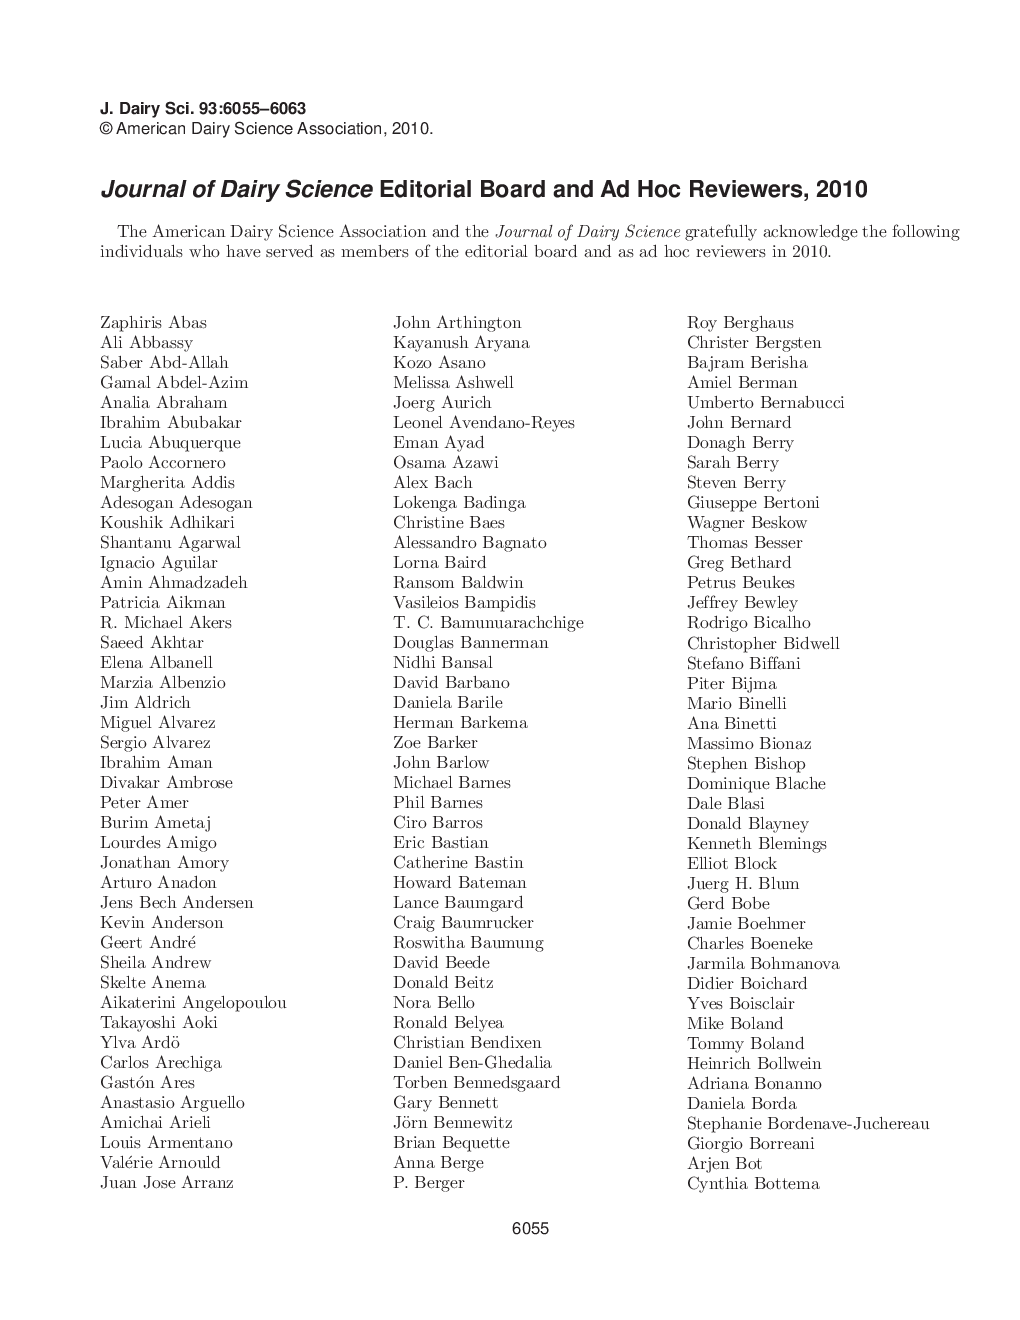 Journal of Dairy Science Editorial Board and Ad Hoc Reviewers, 2010